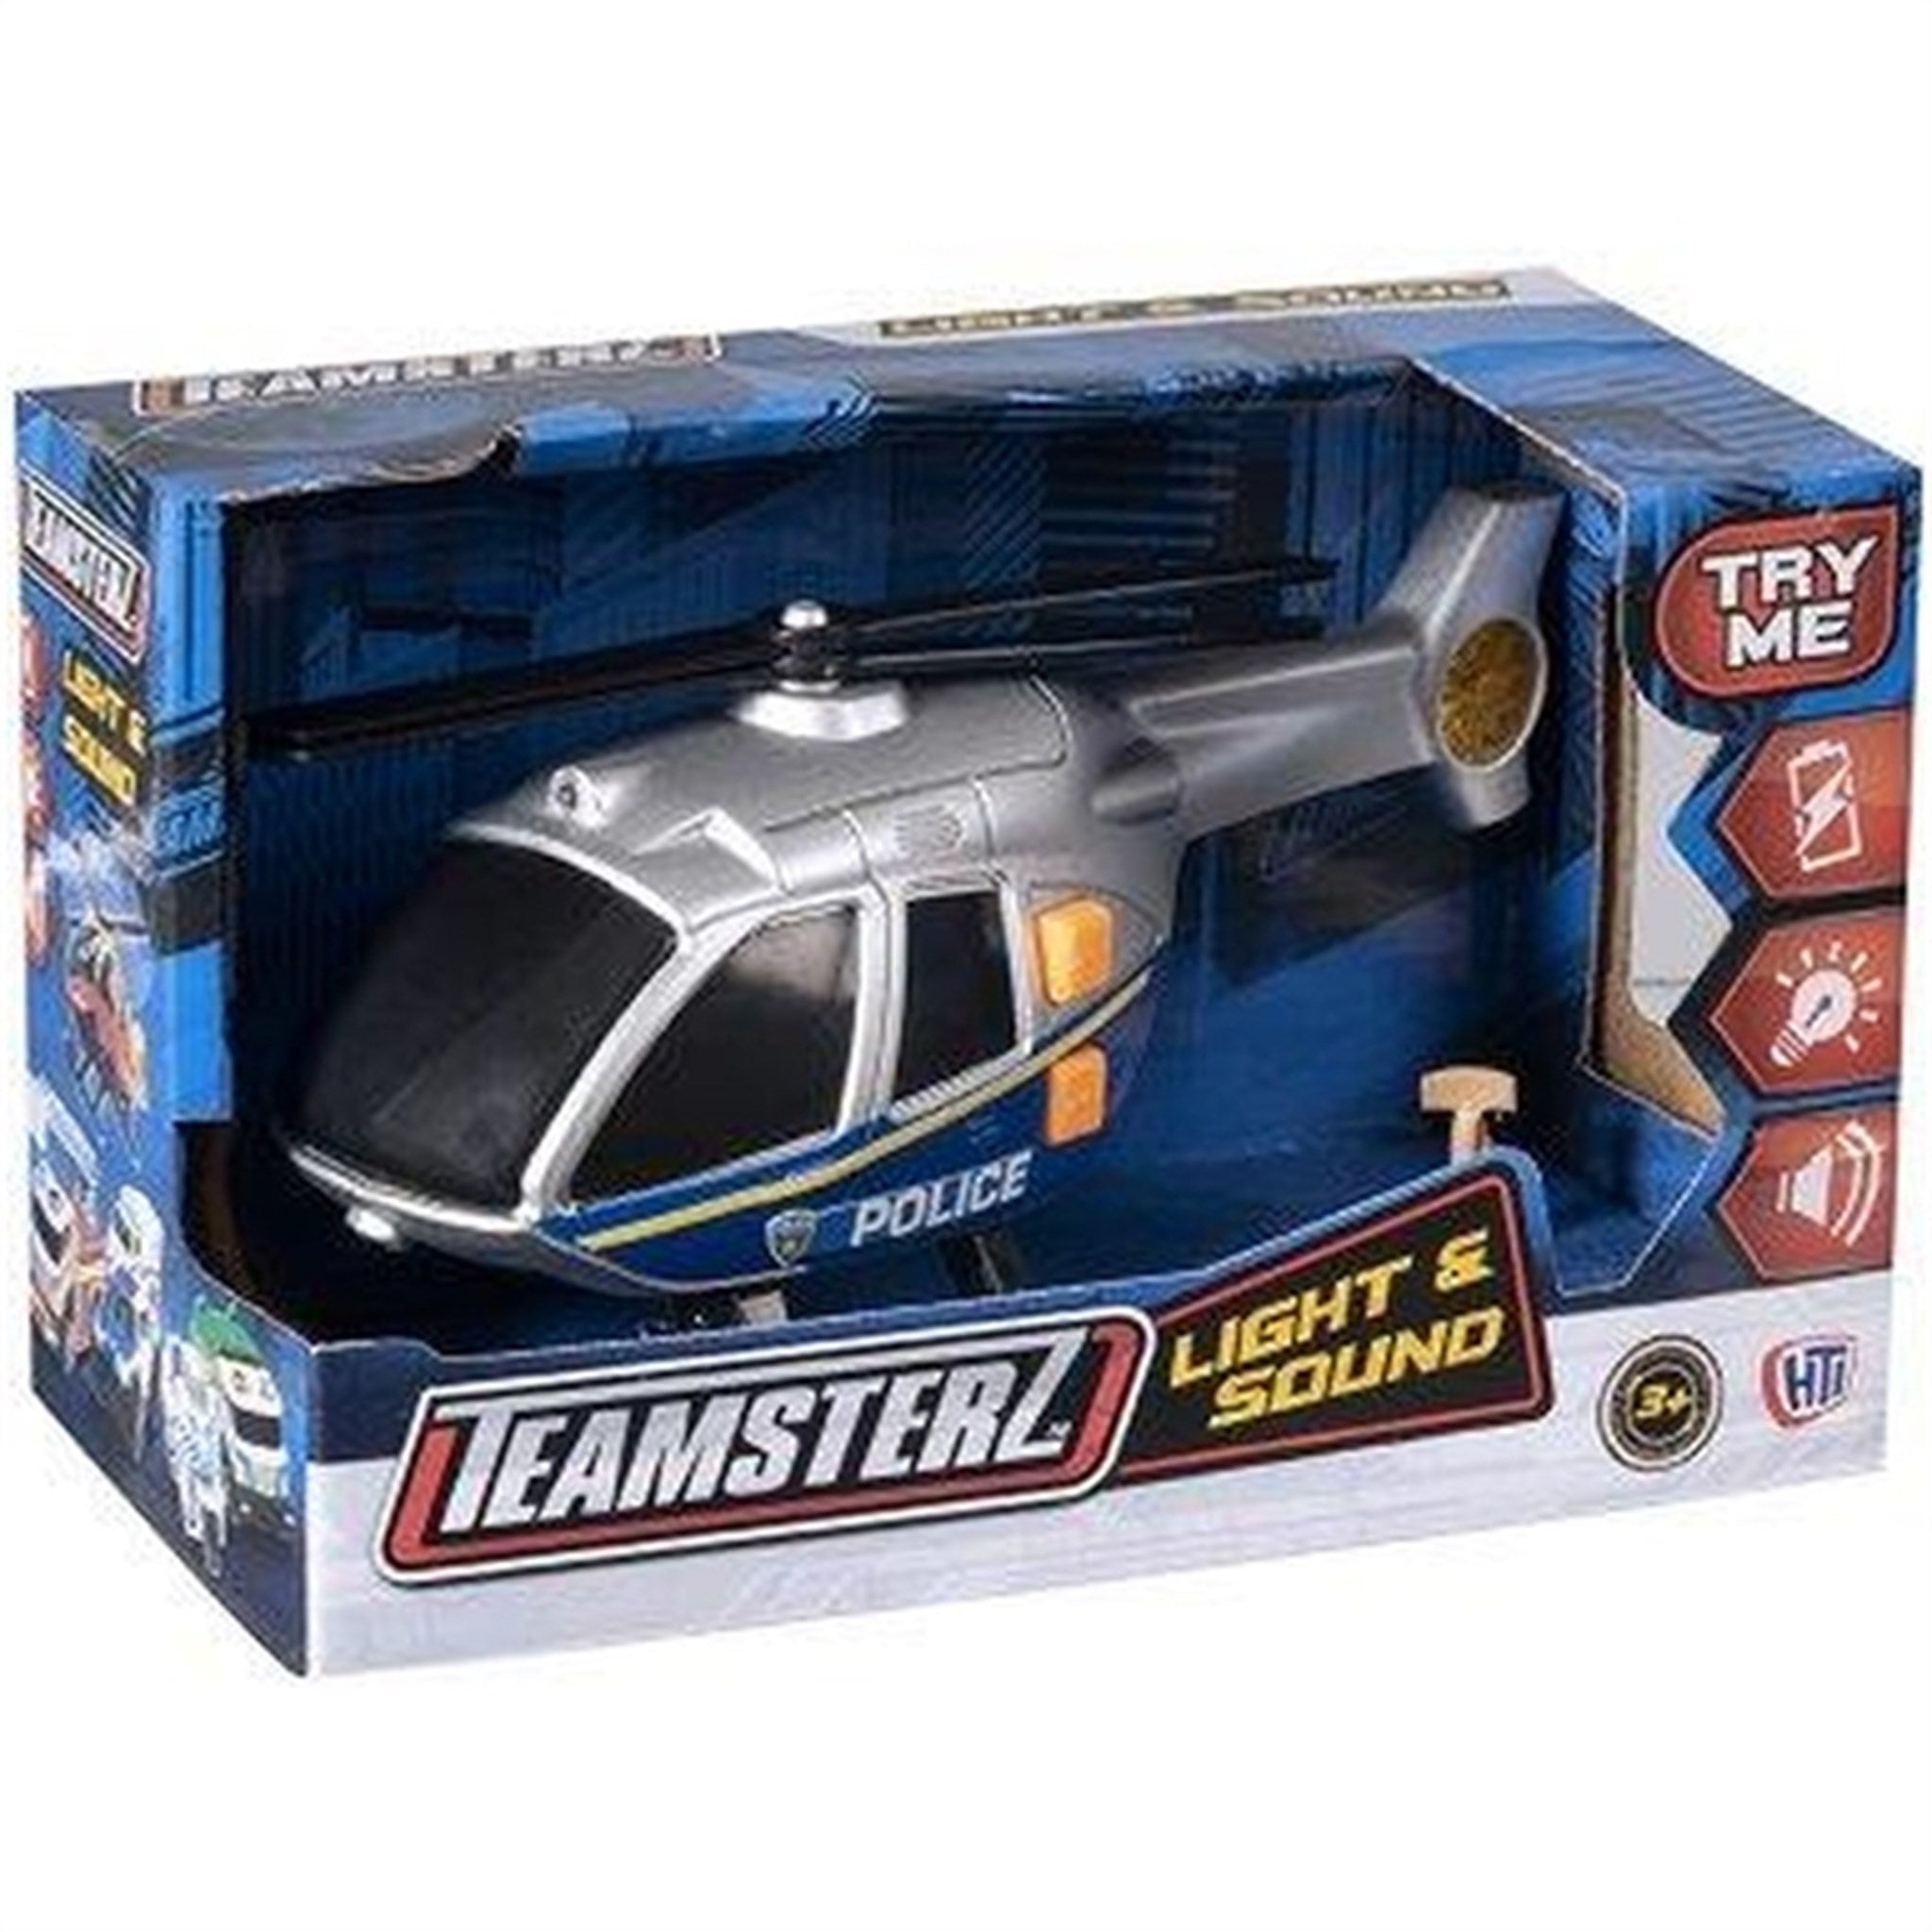 Teamsterz Small L&S Helicopter 2